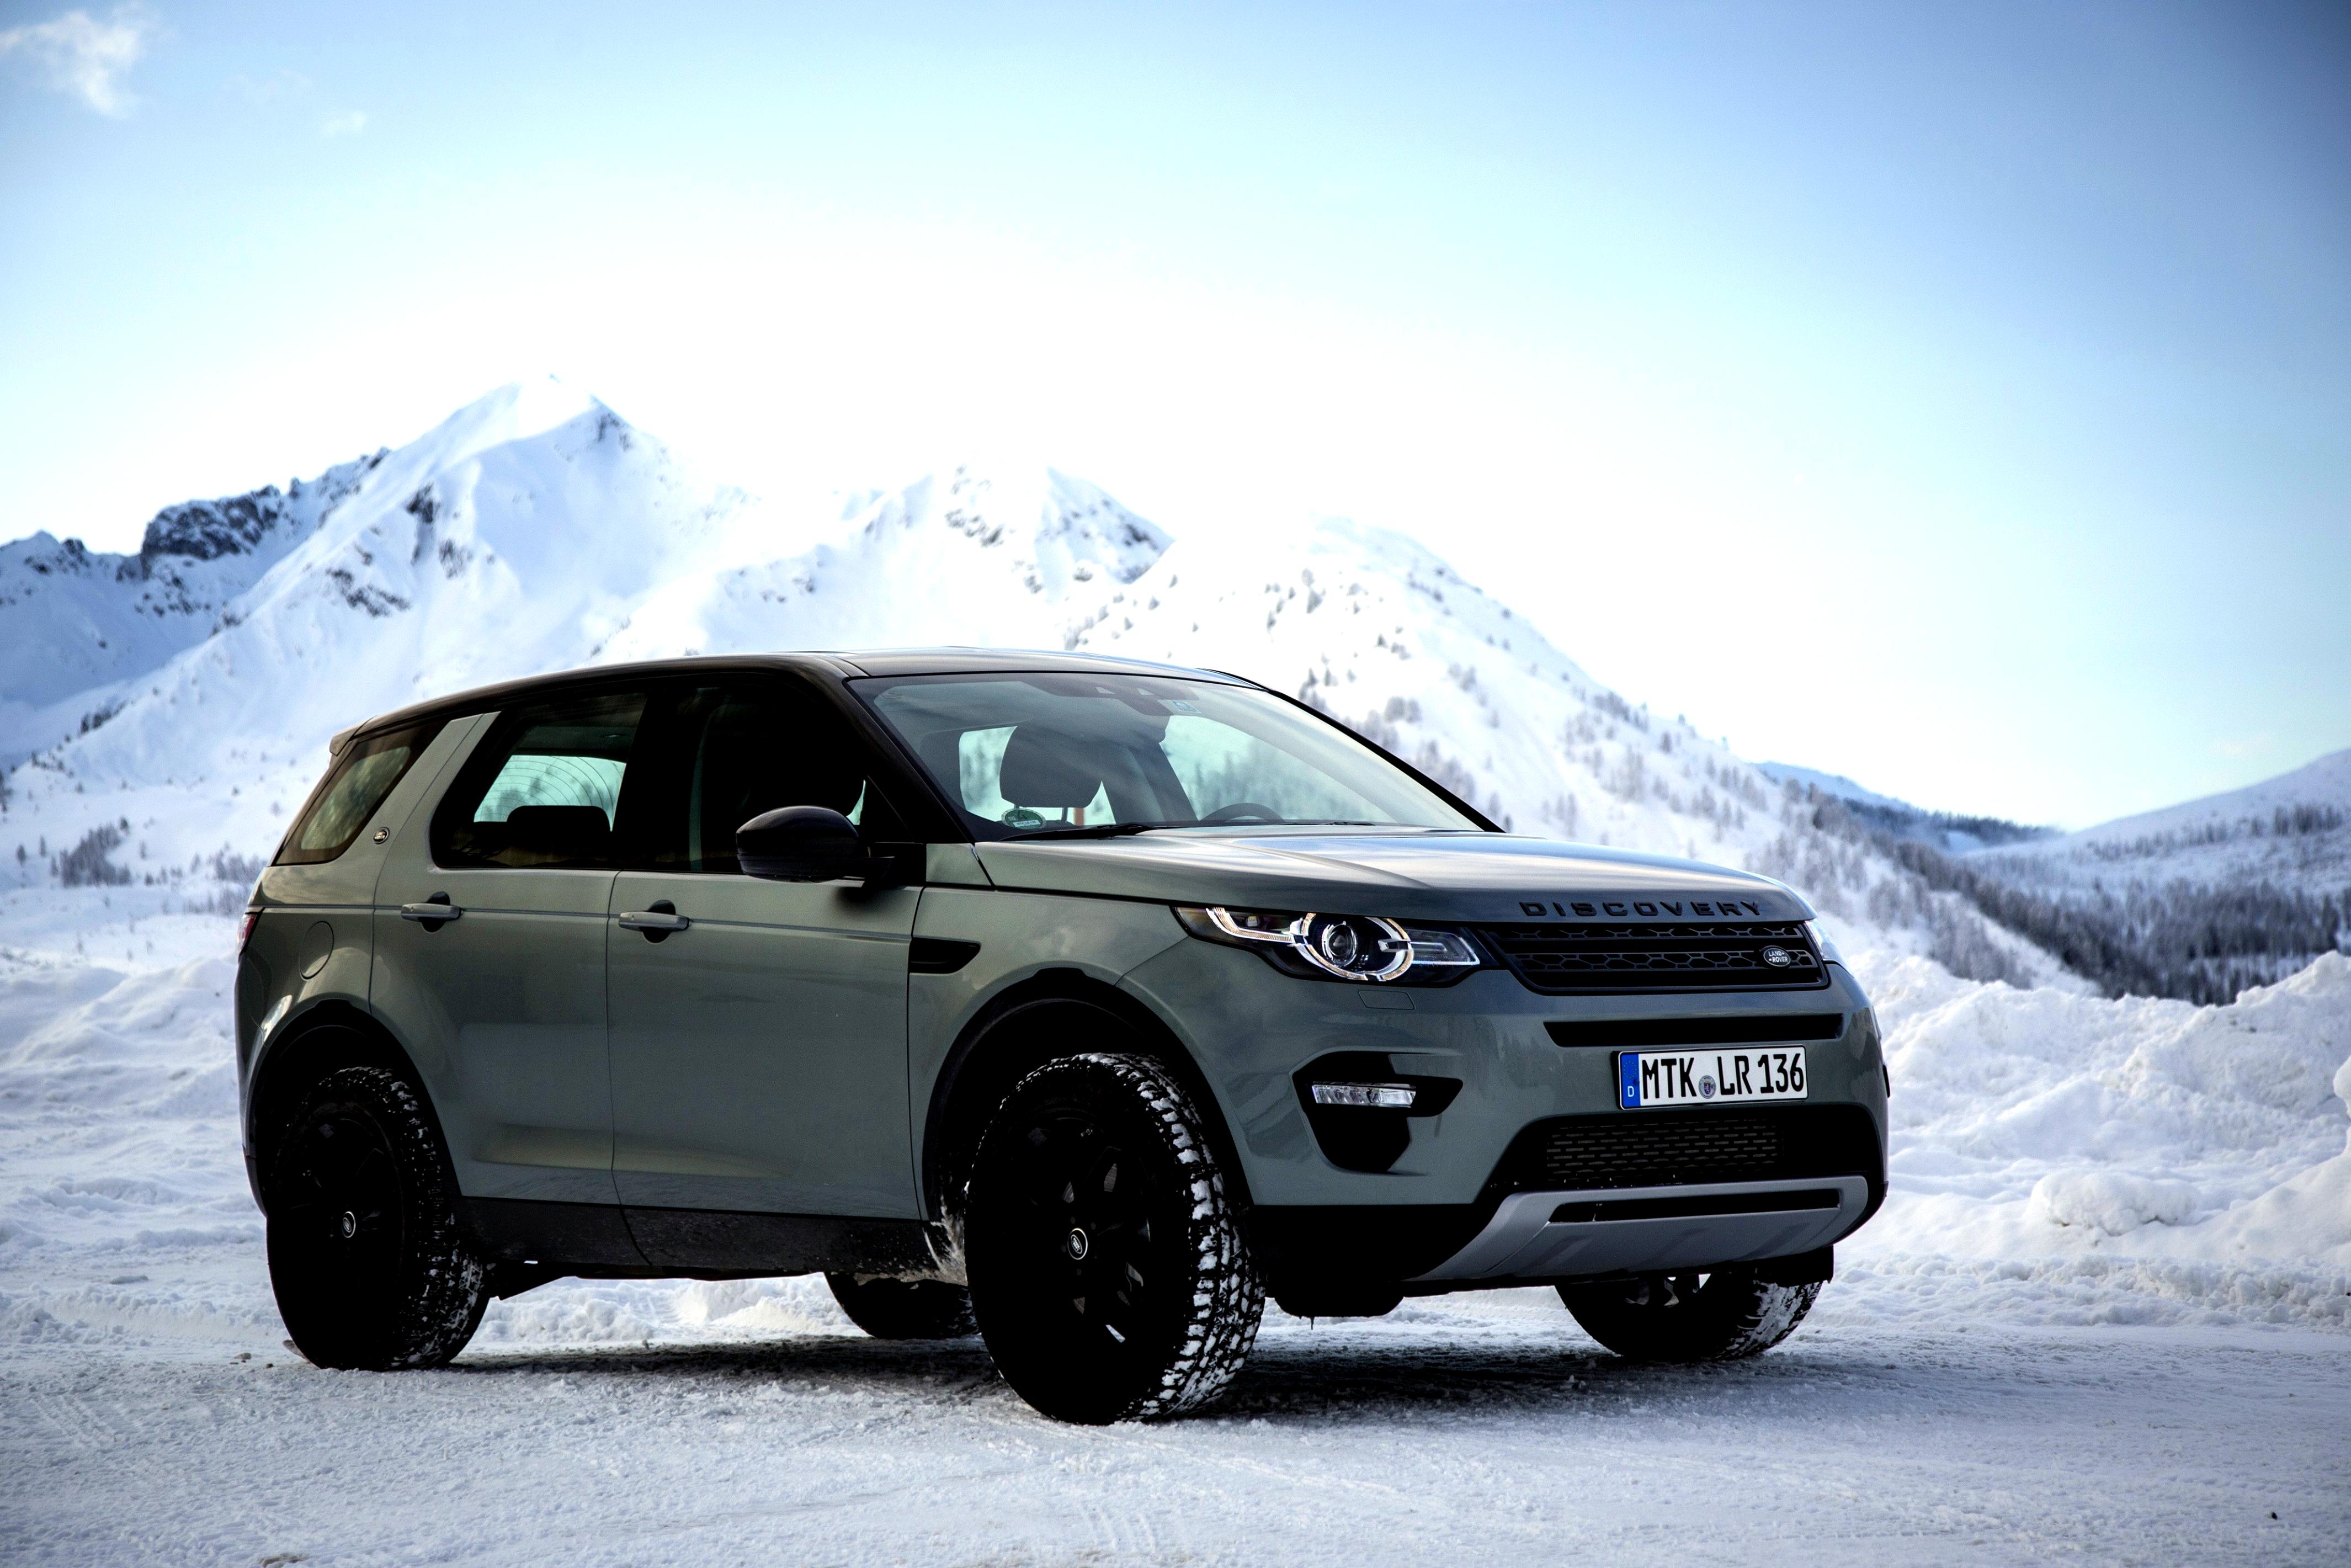 Land Rover Discovery Sport 2014 #90